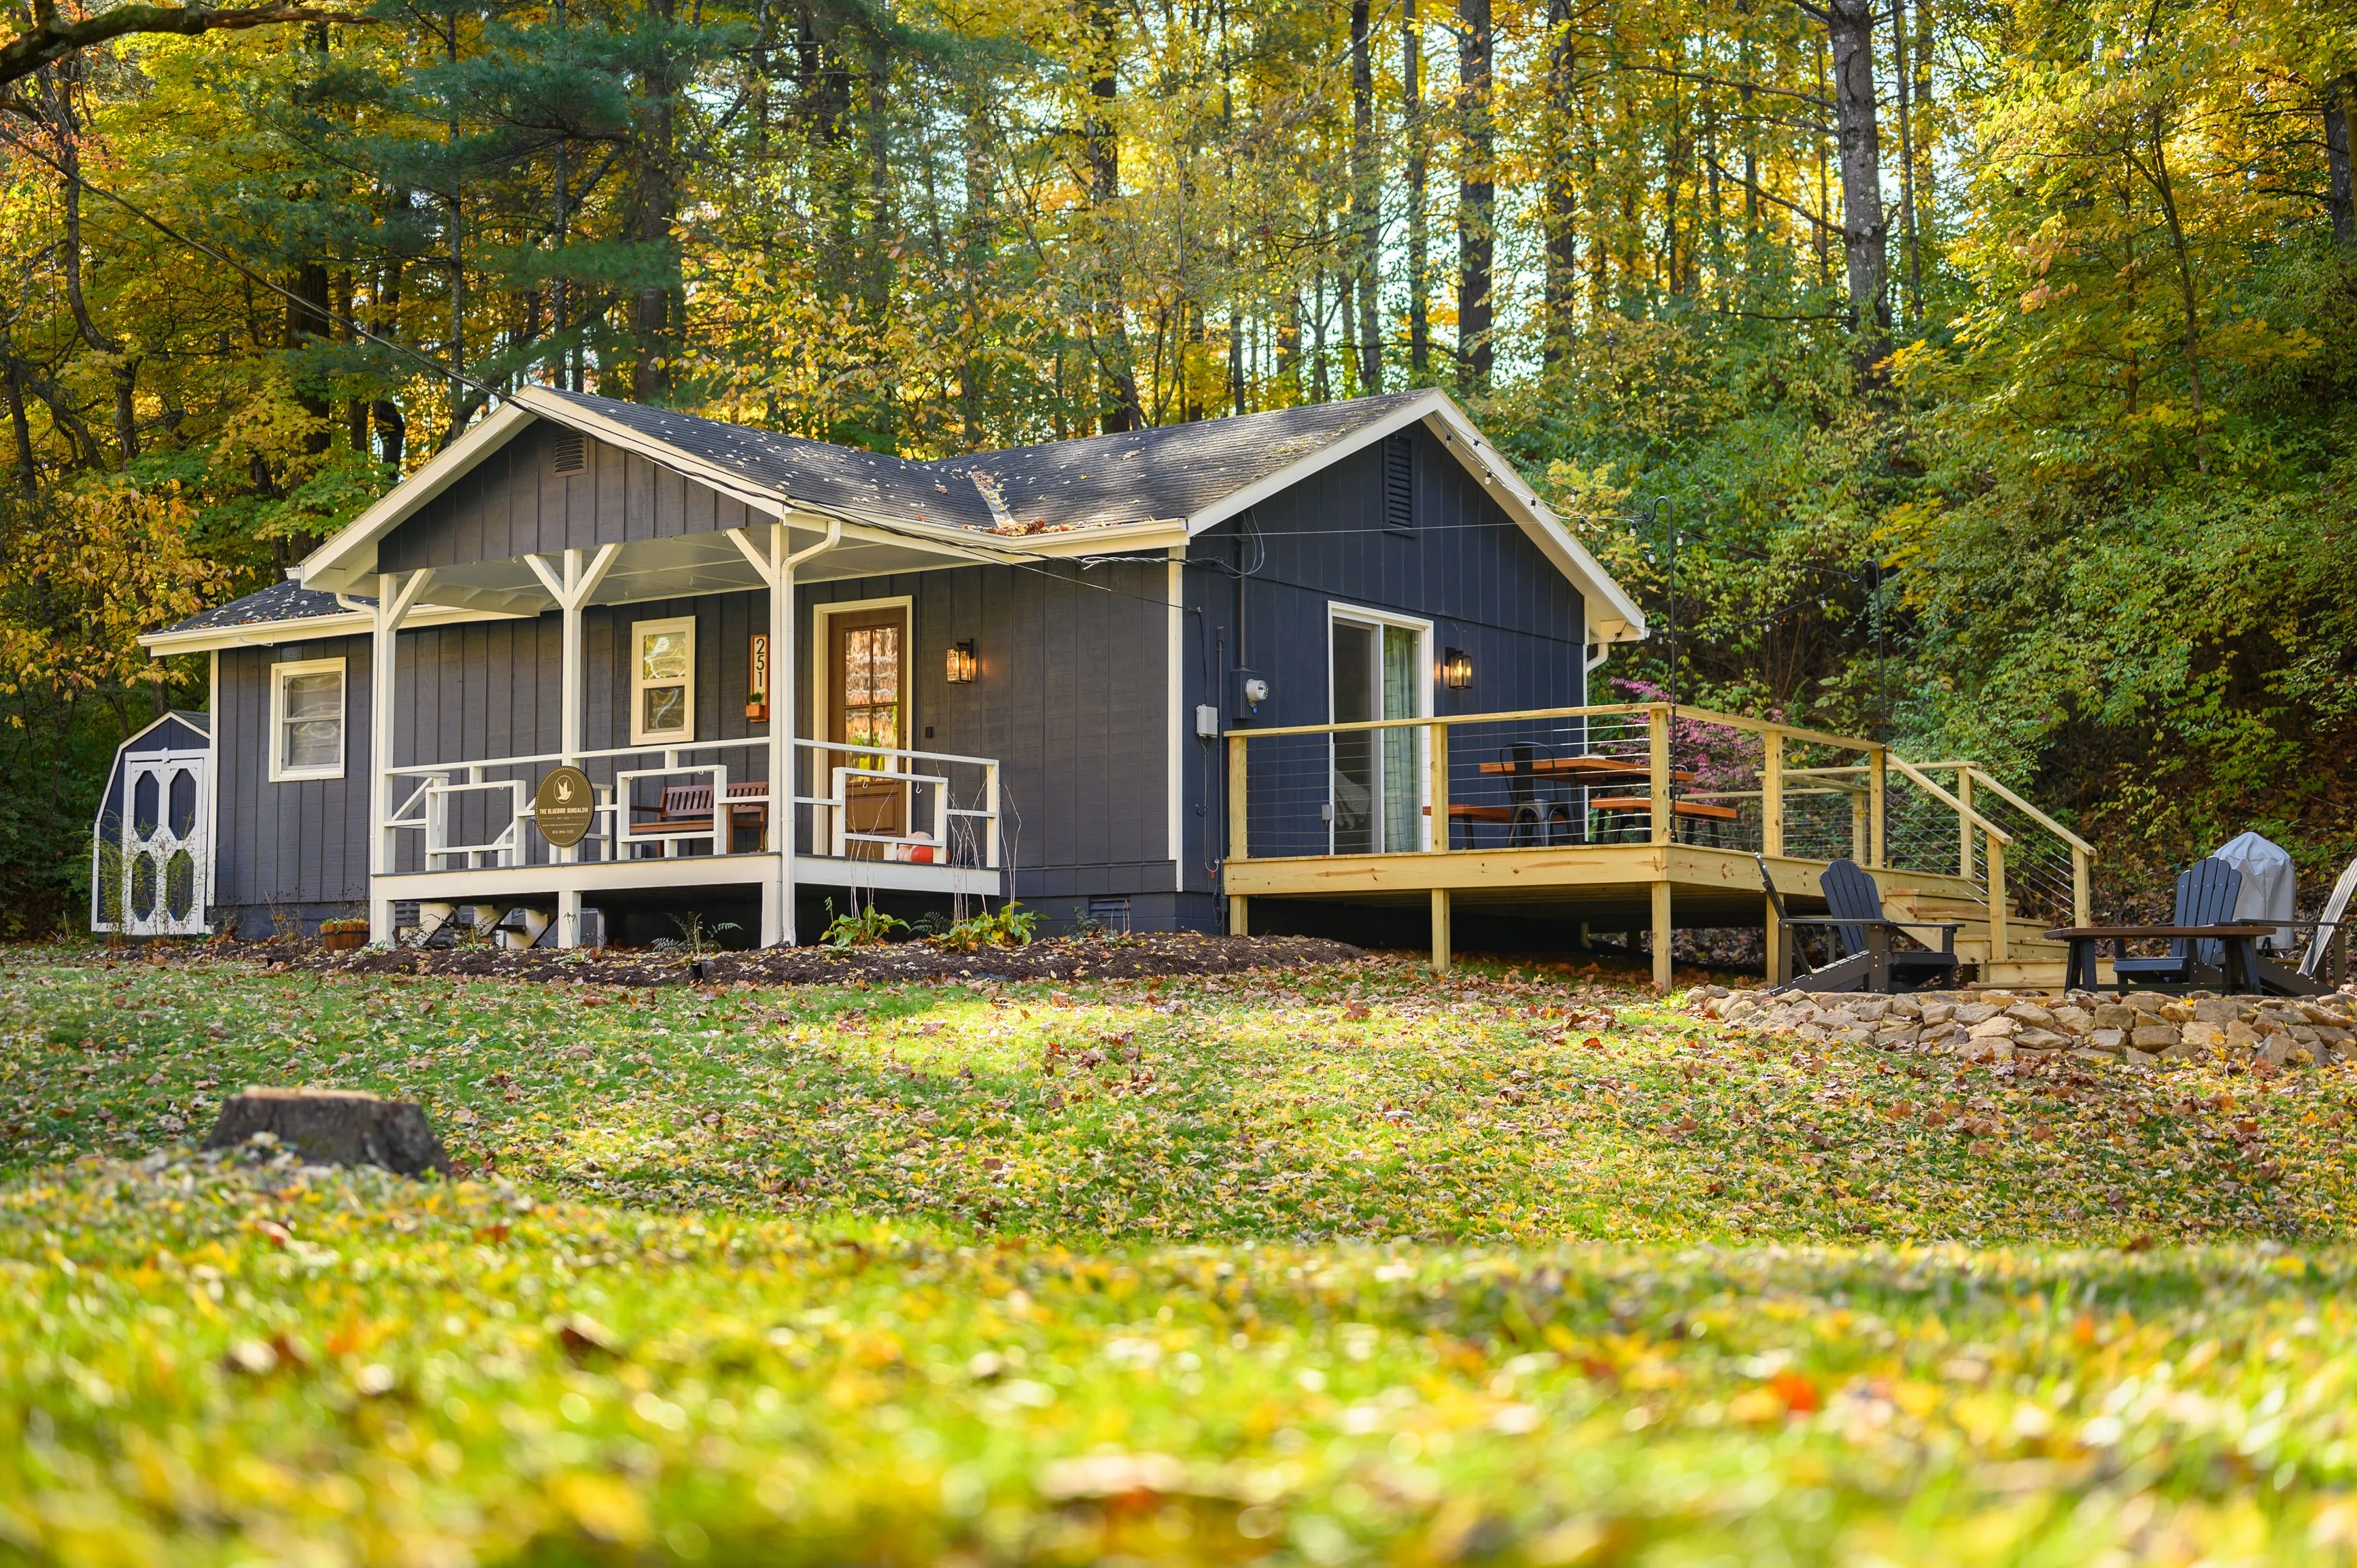 Cozy cottage house with a front porch and deck in a forest setting during autumn.